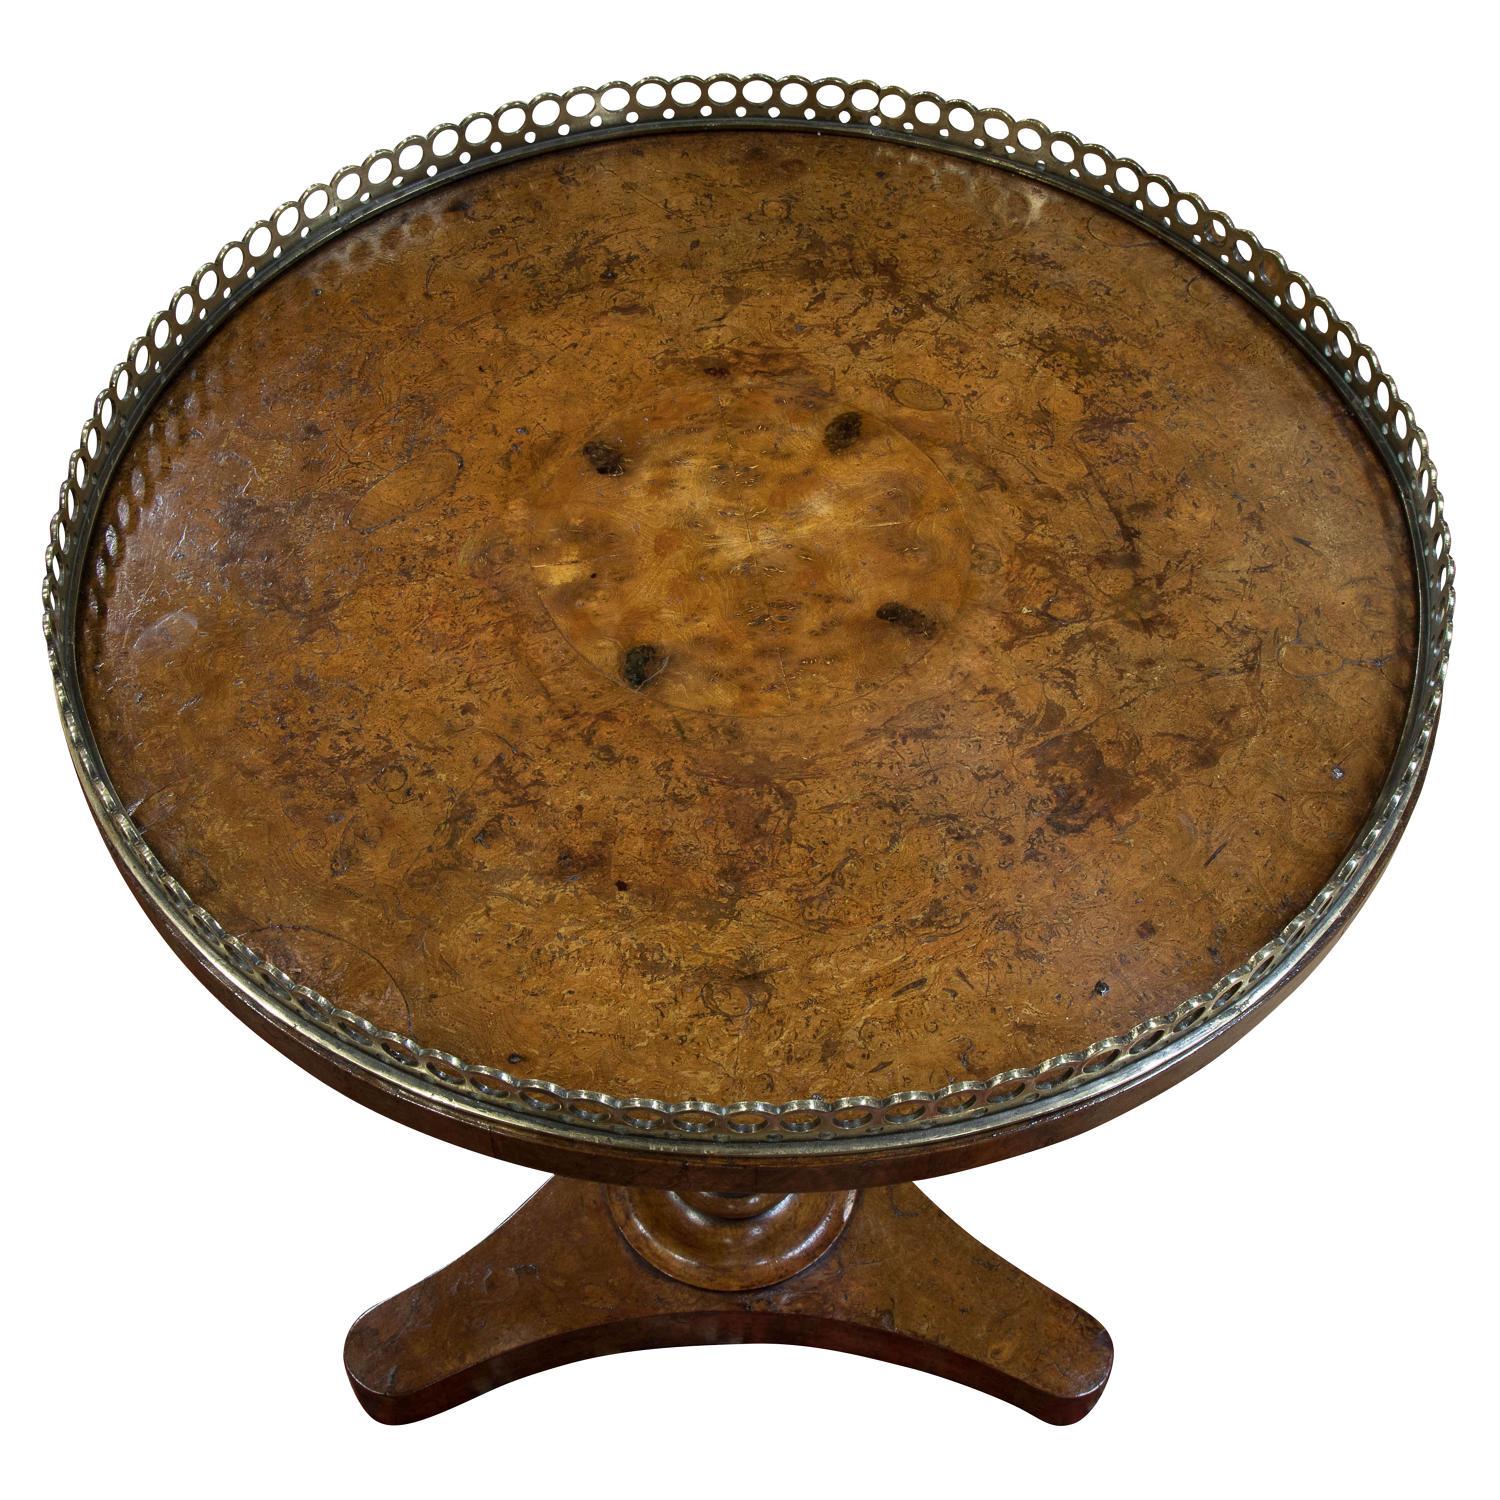 A William IV burr elm circular occasional table with brass gallery on a baluster turned column on triform base,

circa 1830.